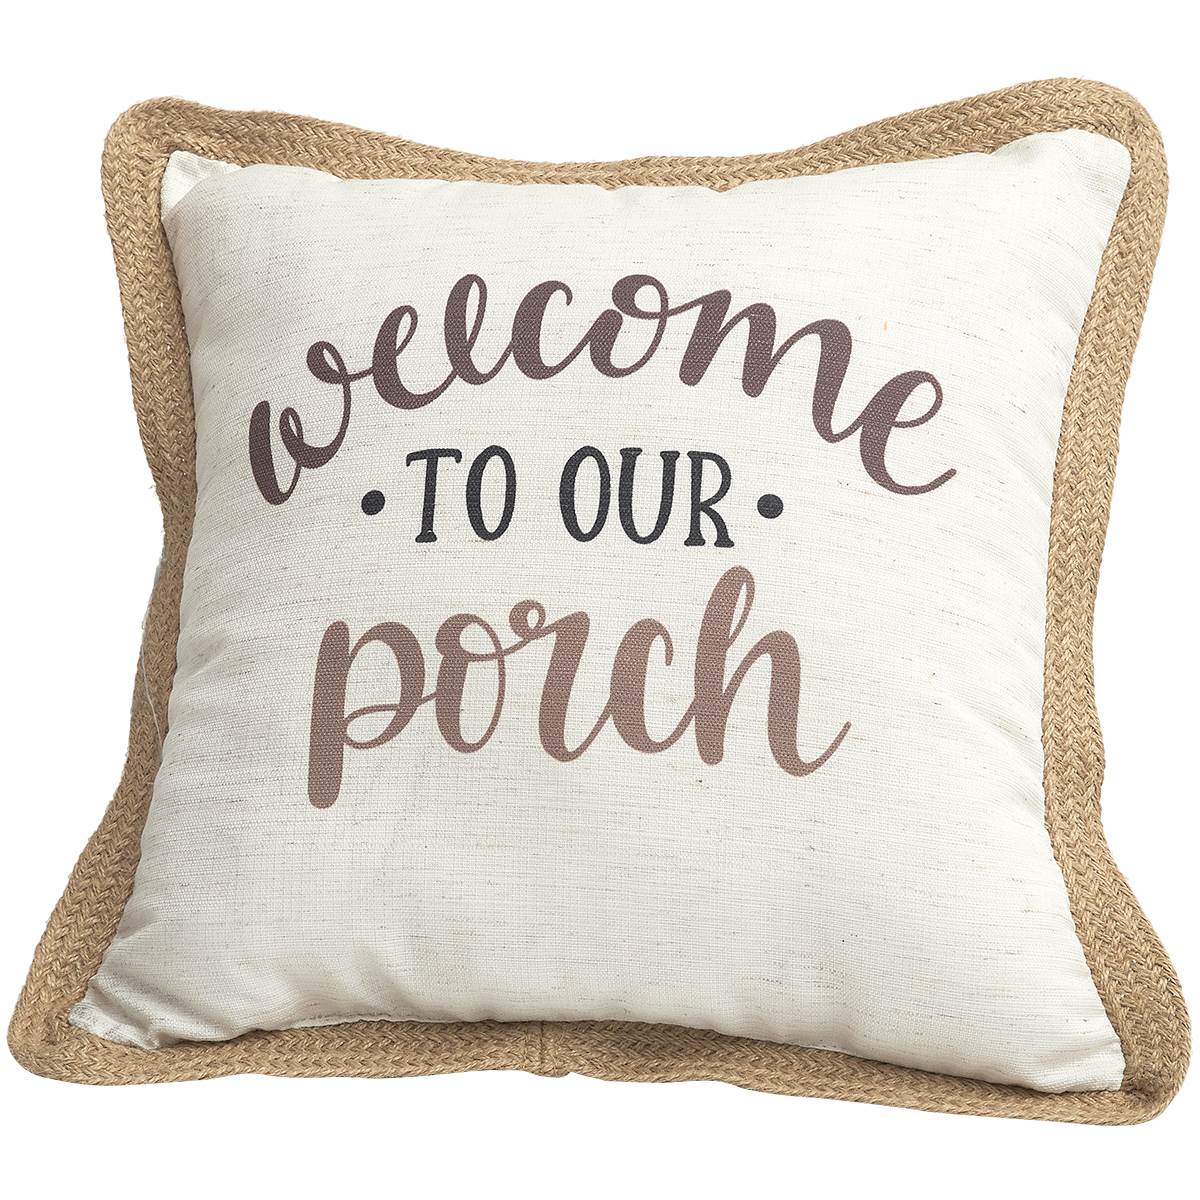 Welcome To Our Porch Decorative Pillow - 18x18